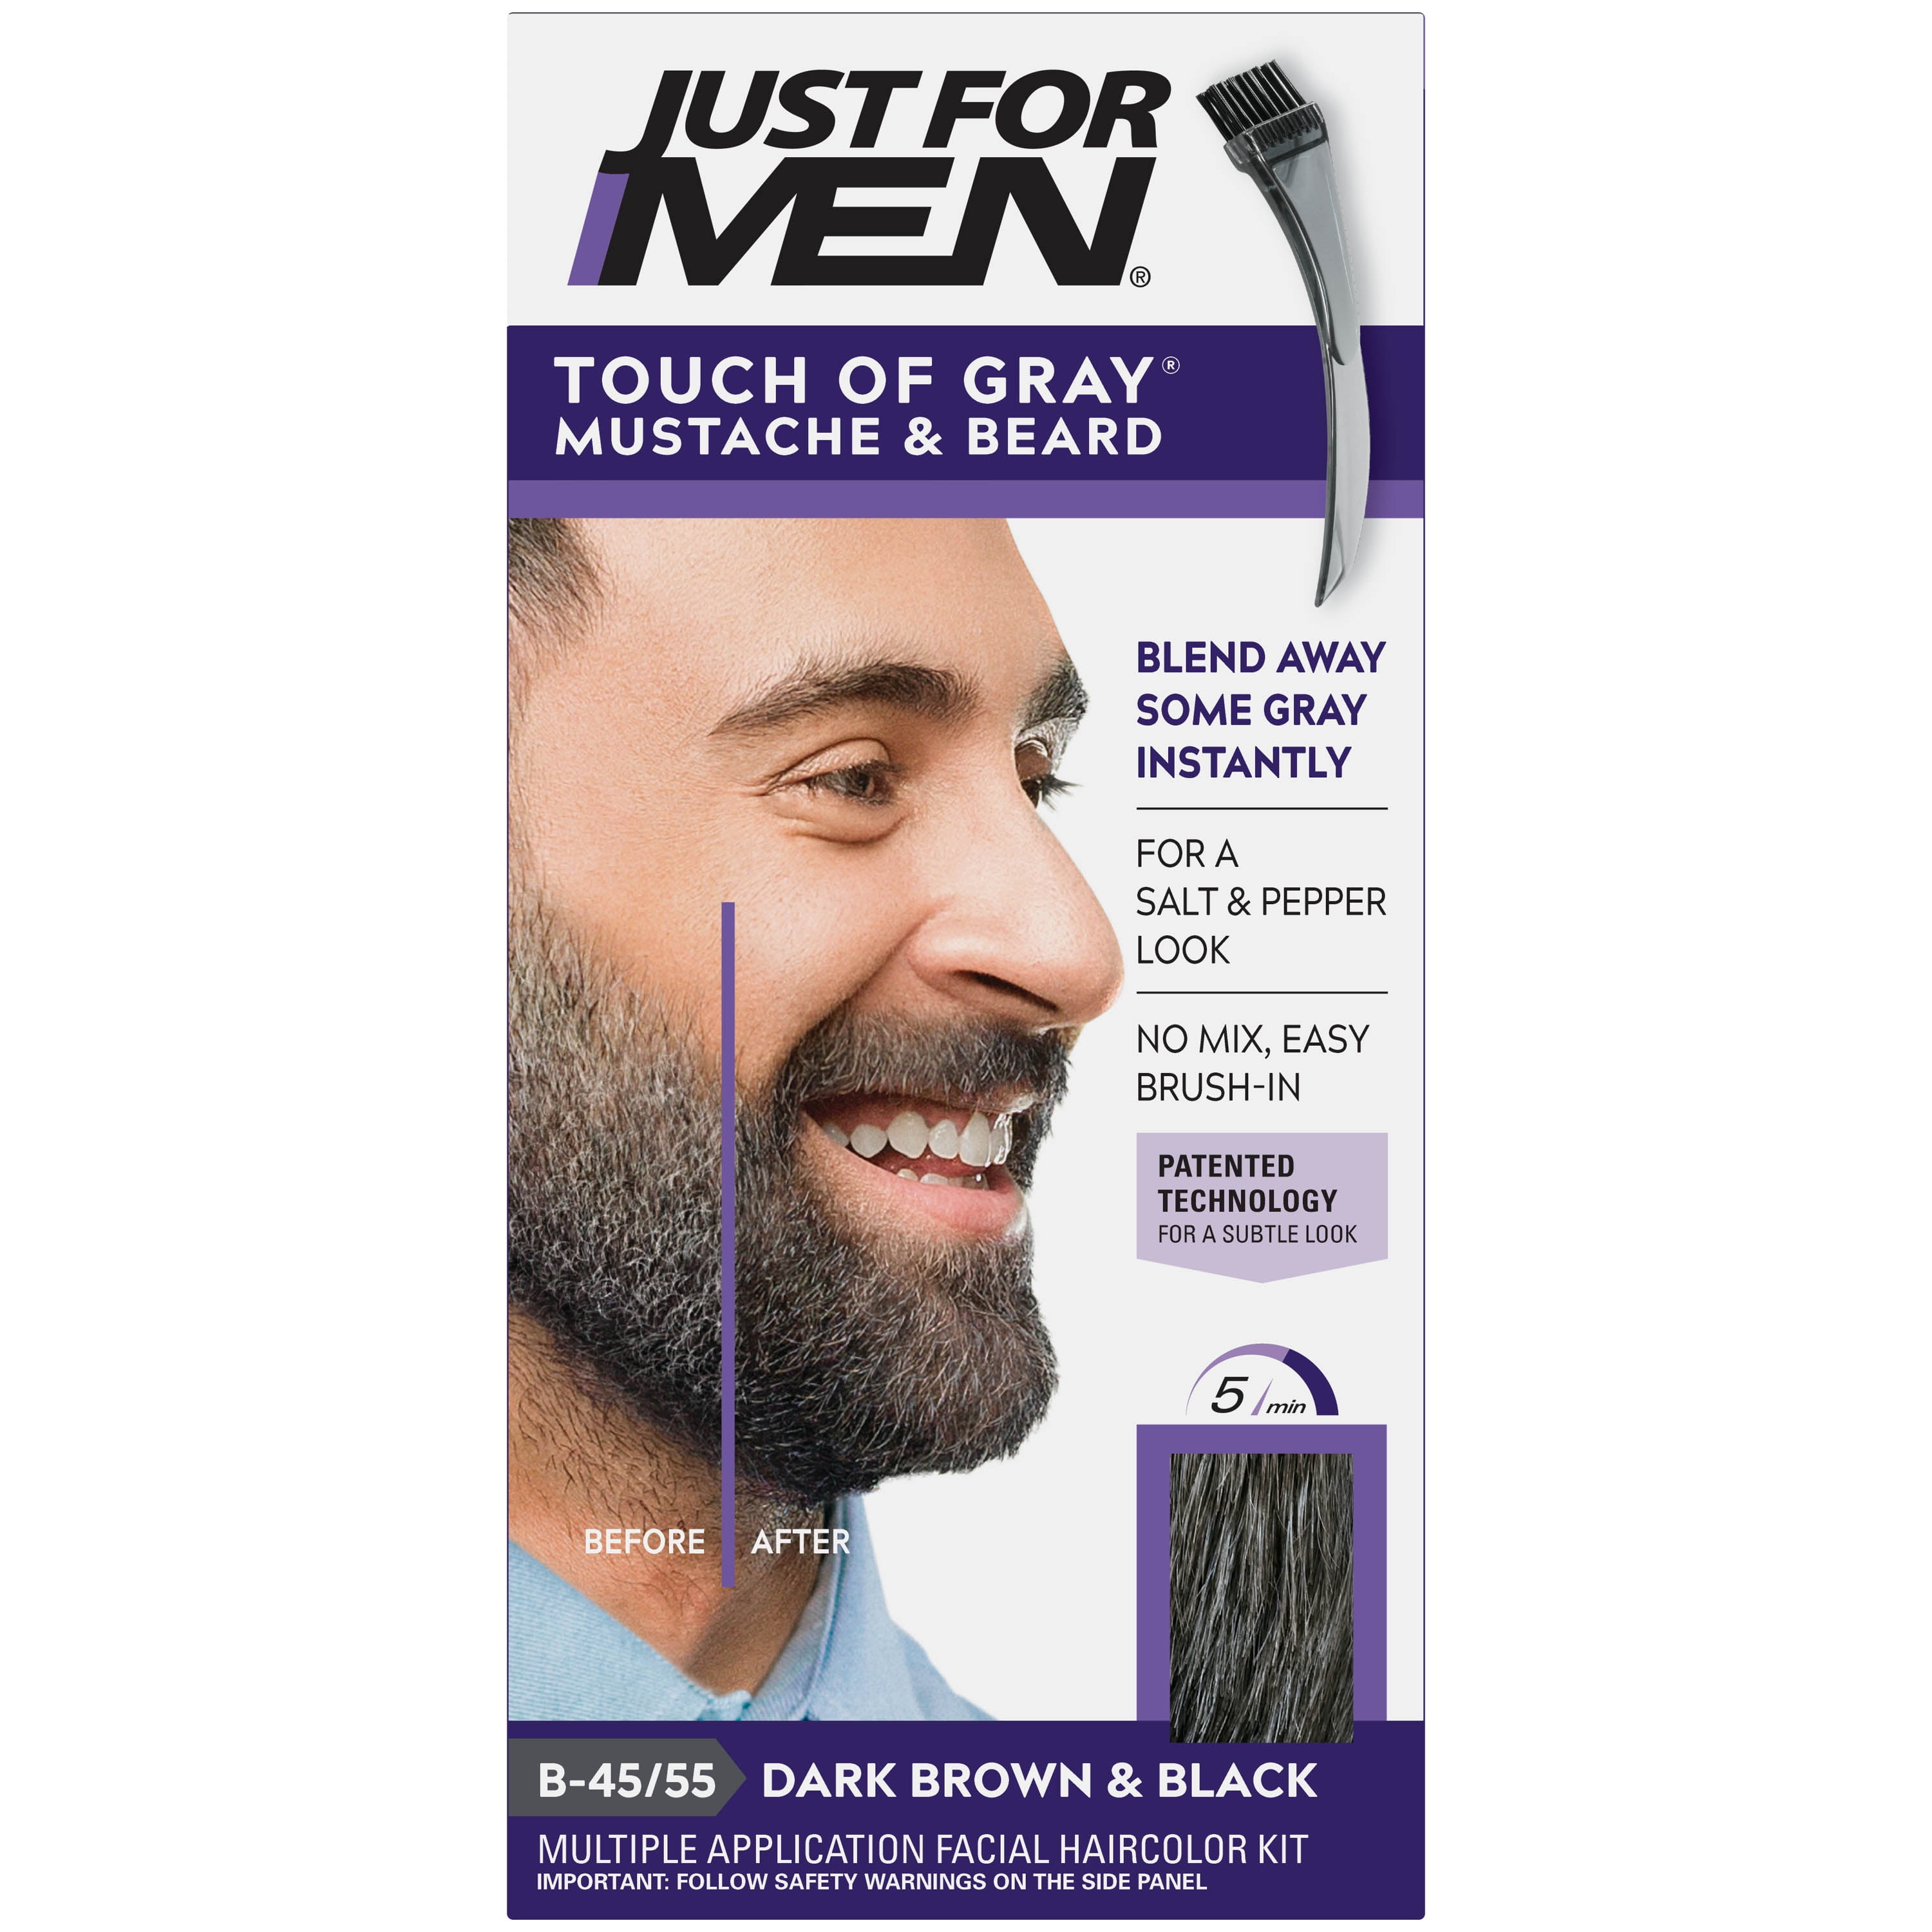 Just For Men Touch of Gray Hair Color, Mustache & Beard, Dark Brown & Black B-45/55